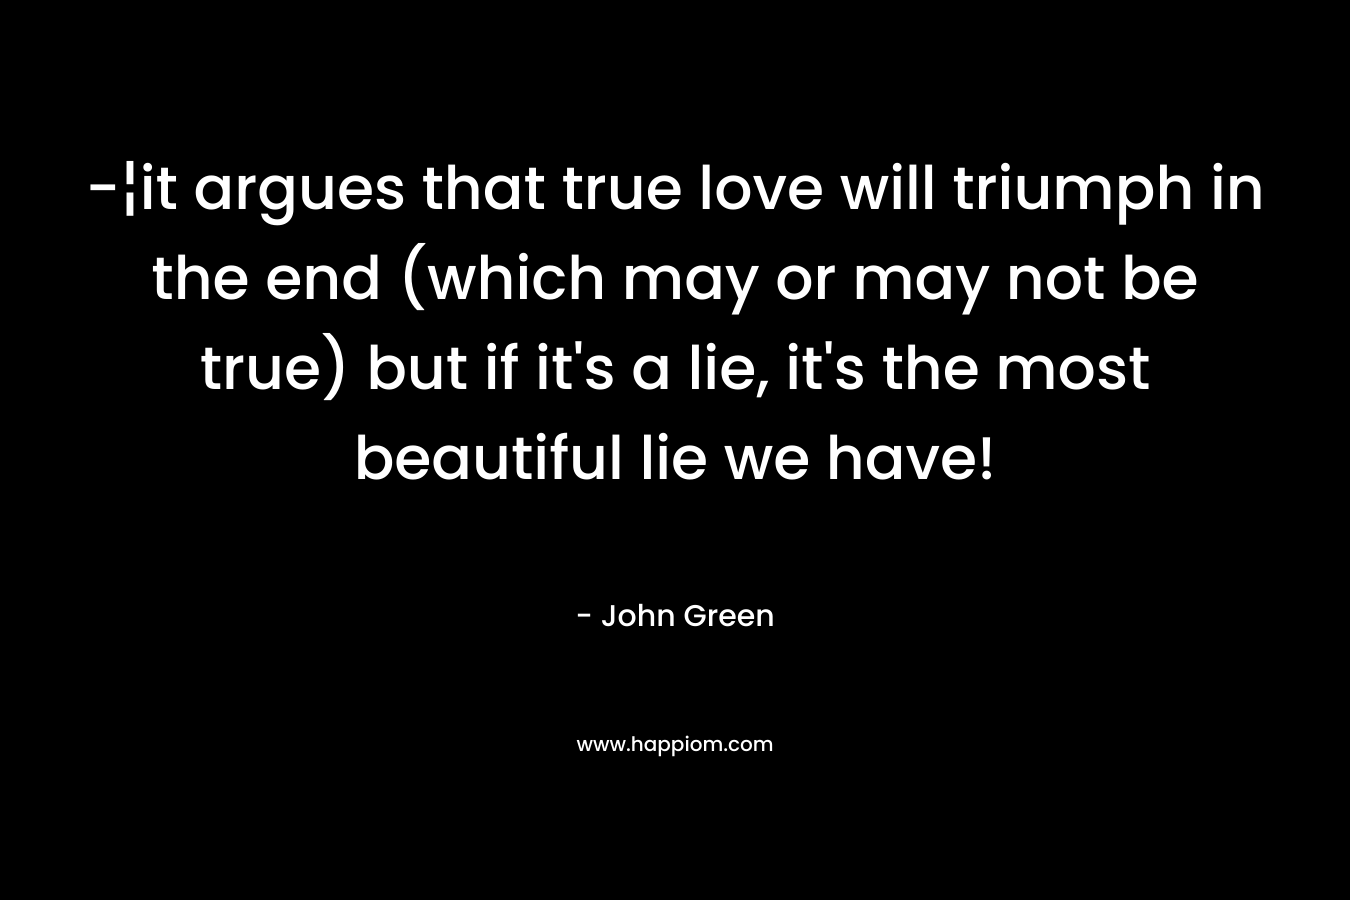 -¦it argues that true love will triumph in the end (which may or may not be true) but if it's a lie, it's the most beautiful lie we have!